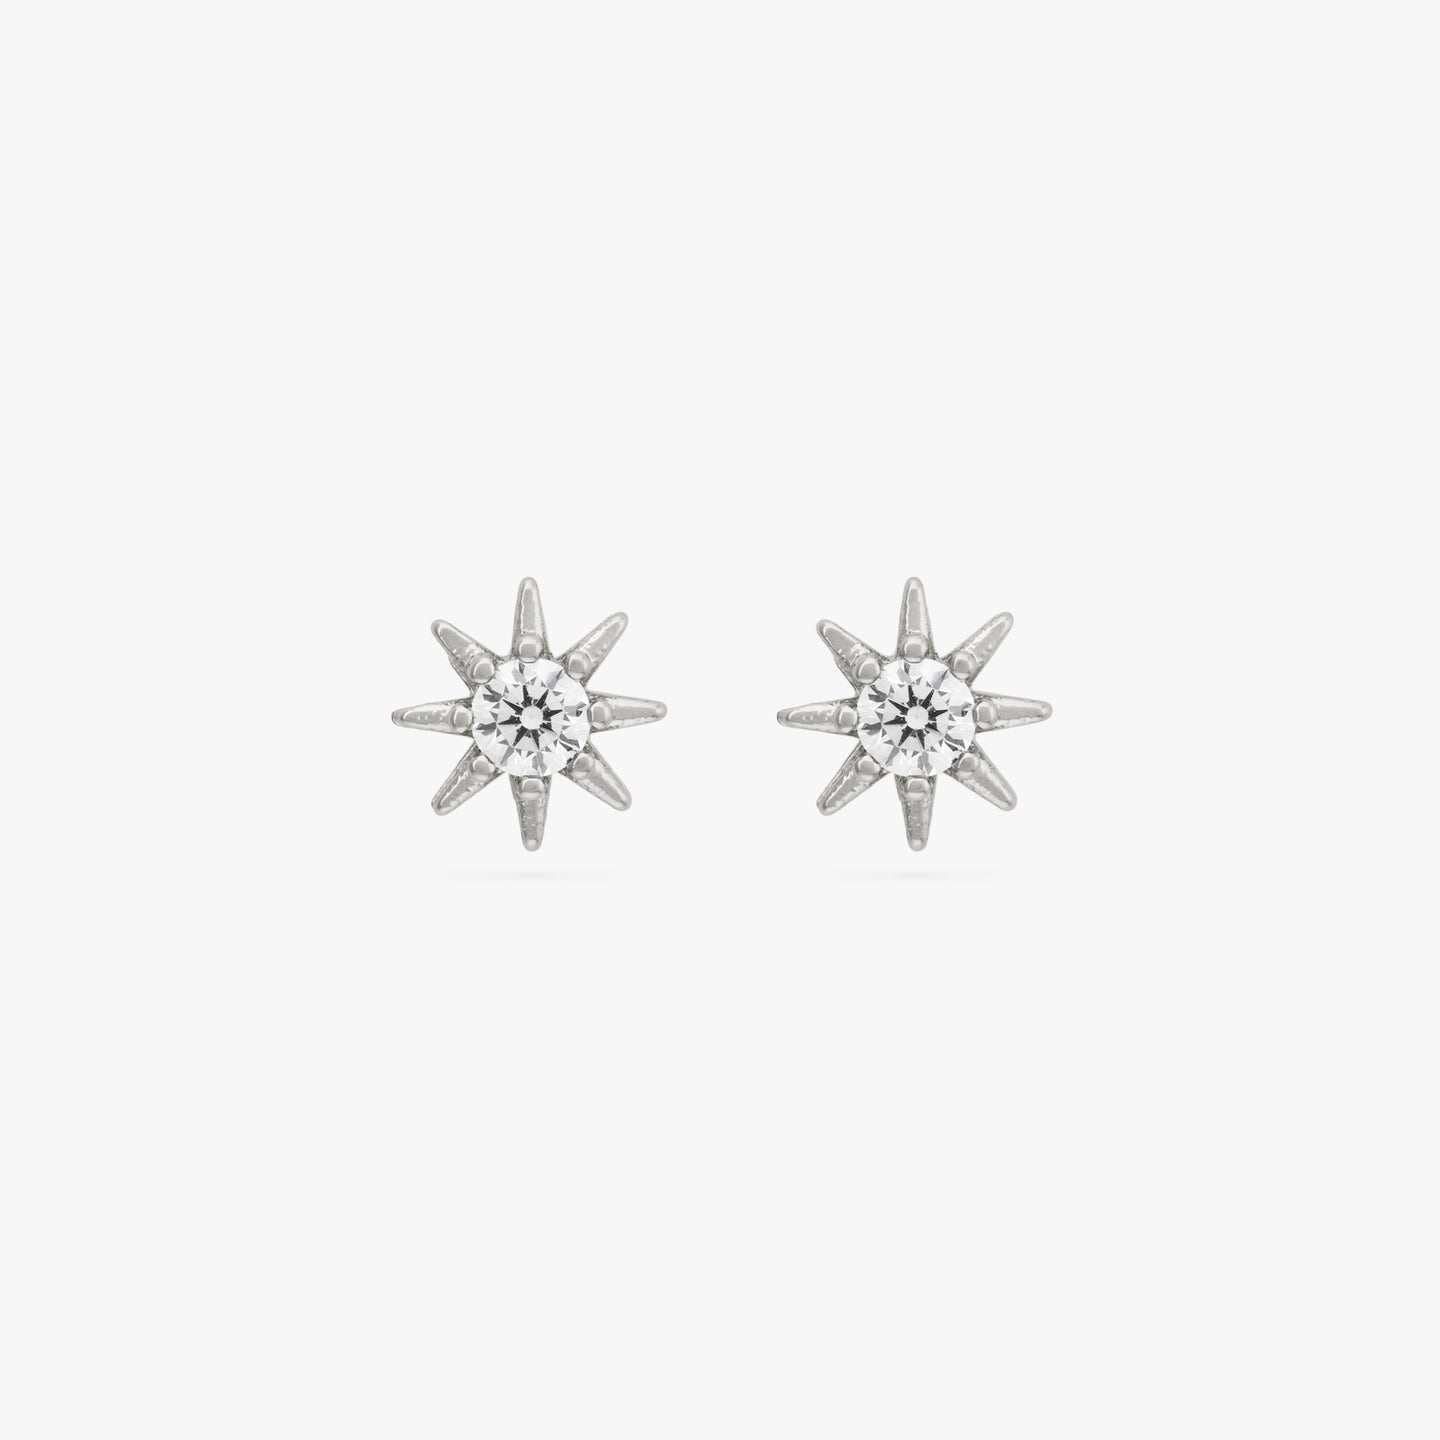 A pair of silver circular shaped studs with very small spikes all around it and CZ gem in the center. [pair] color:null|silver/clear